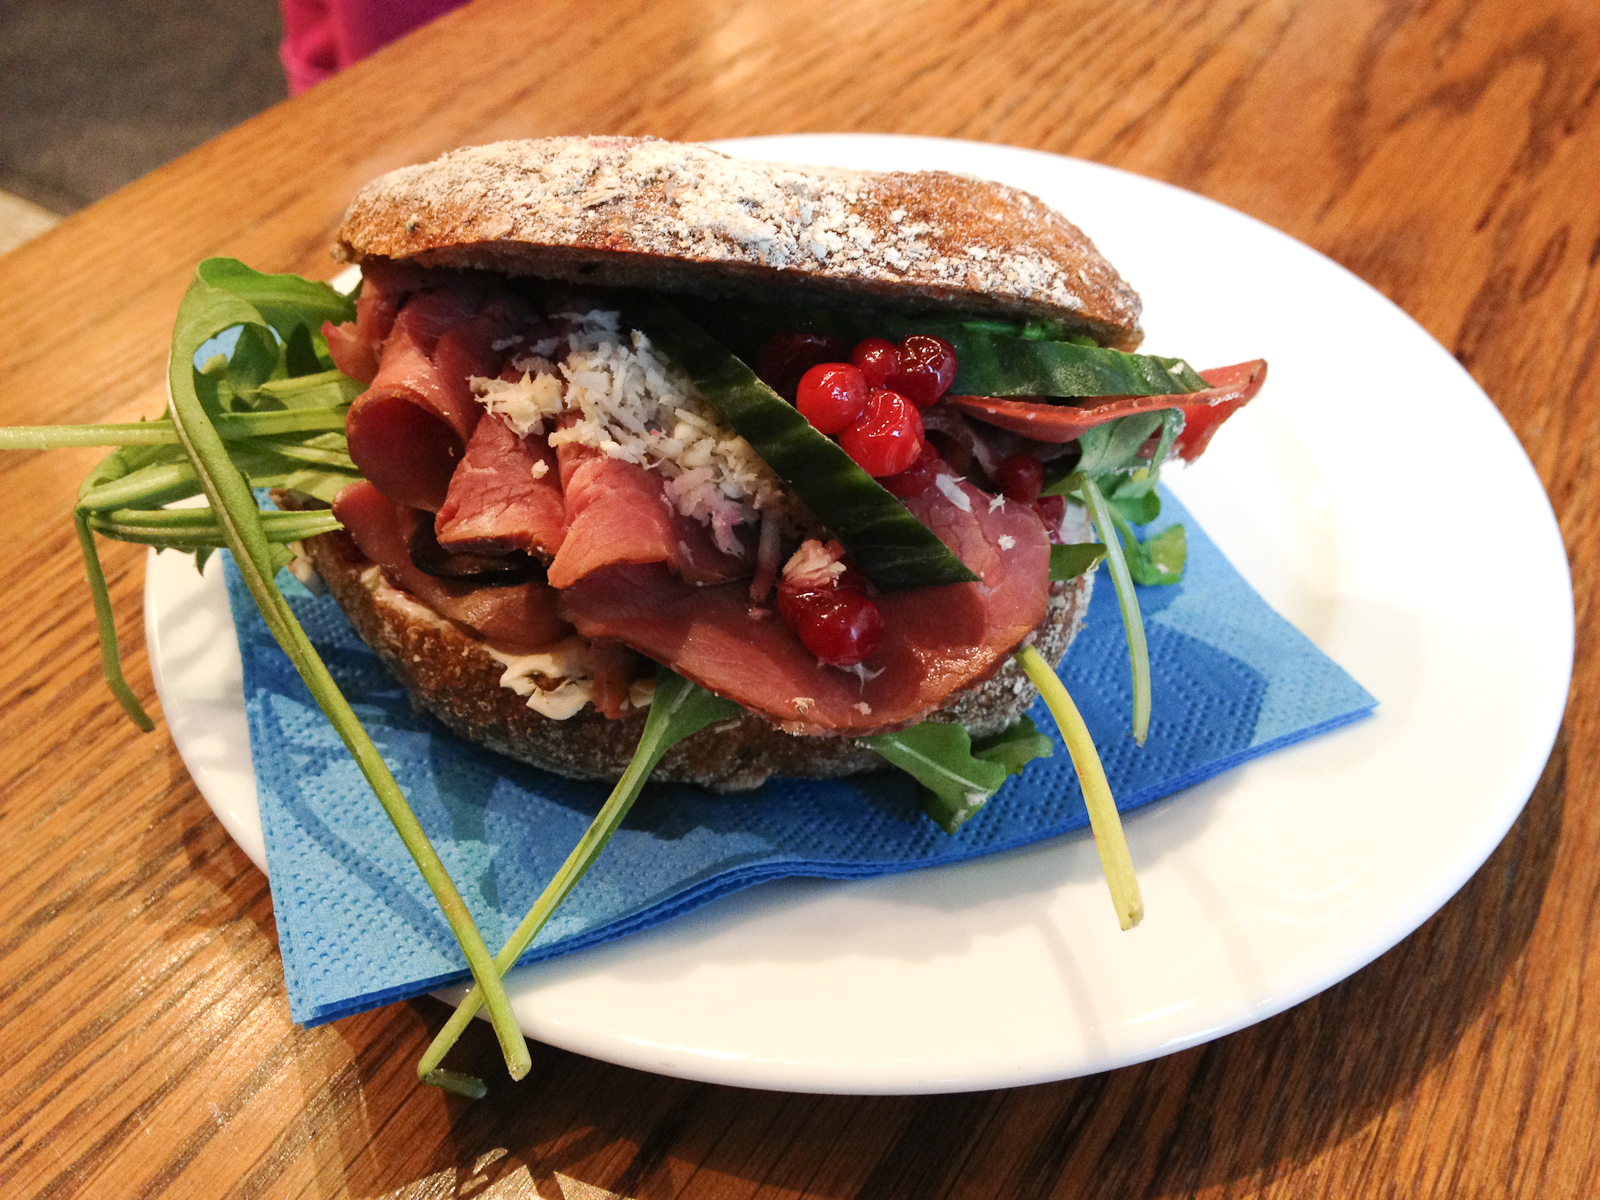 Elk and Lingonberry Sandwich